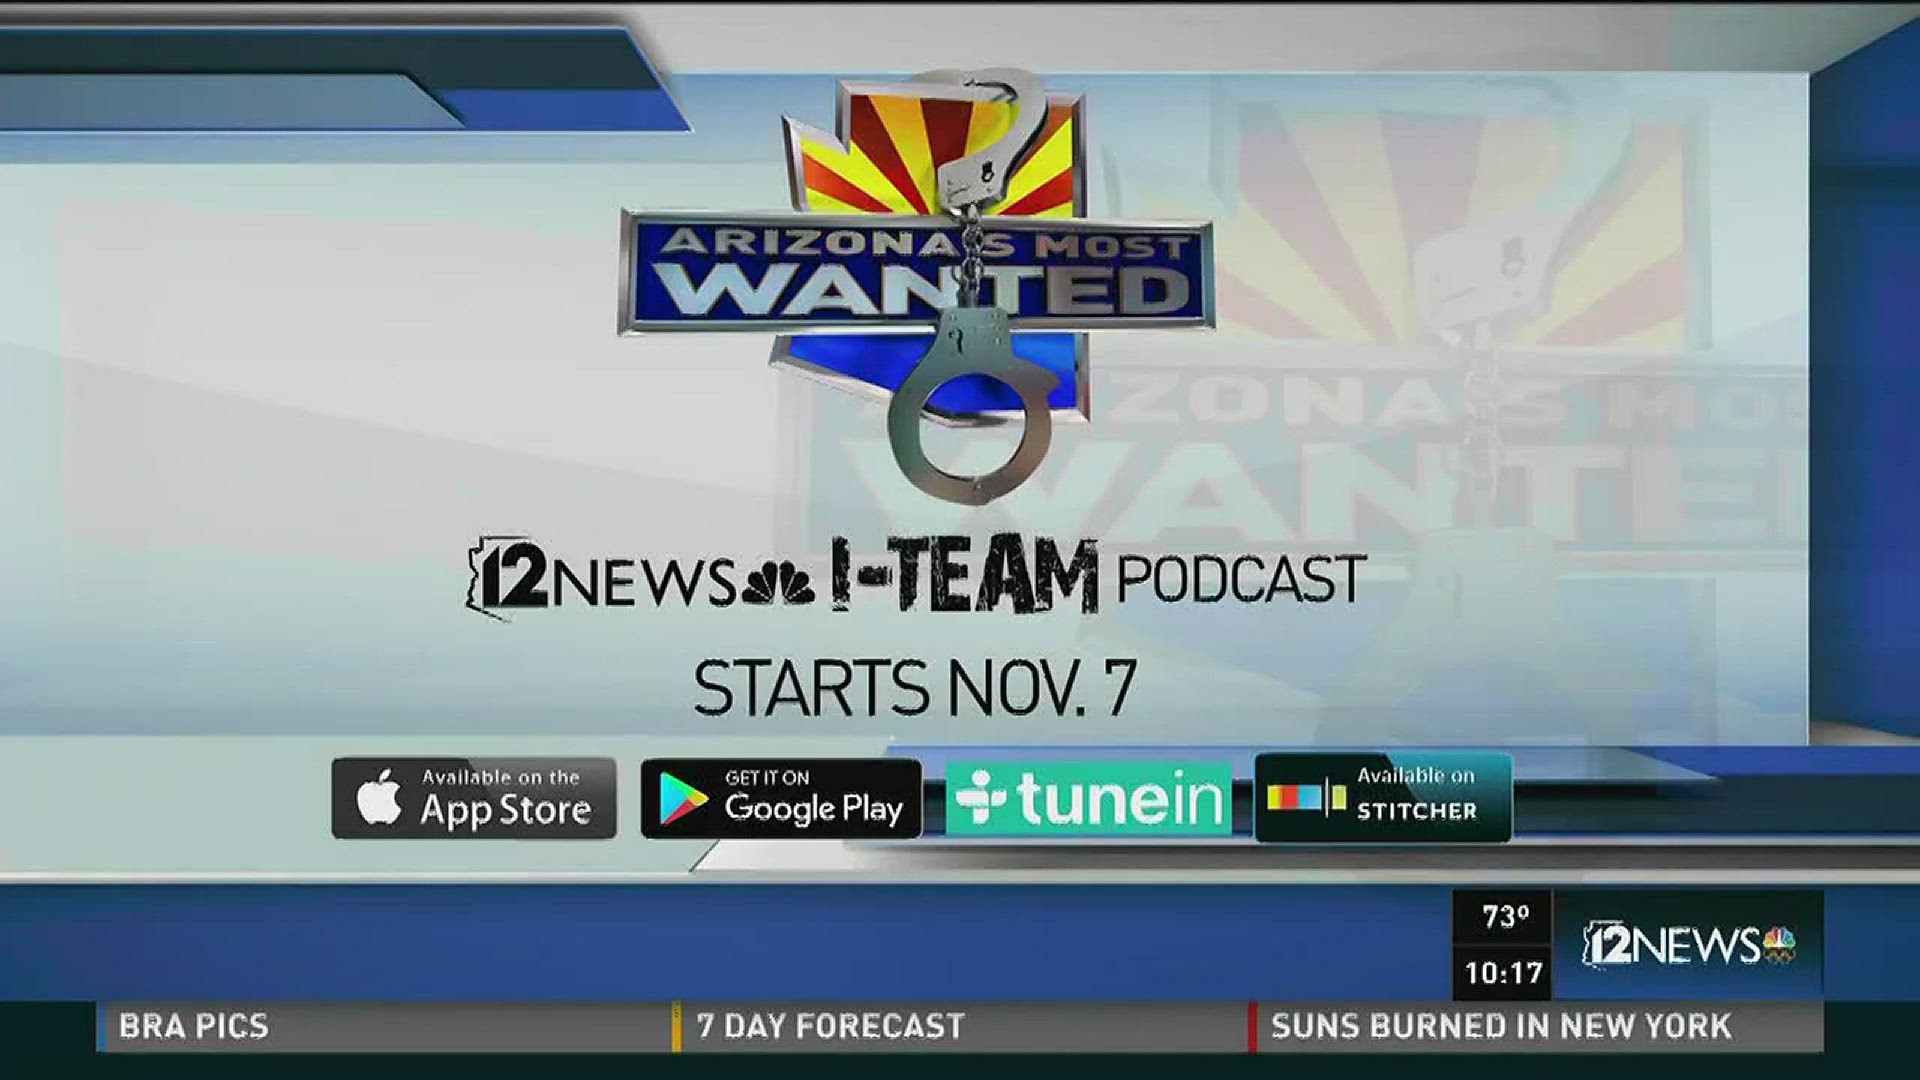 12 News starts a new podcast called Arizona's Most Wanted on Nov. 7.